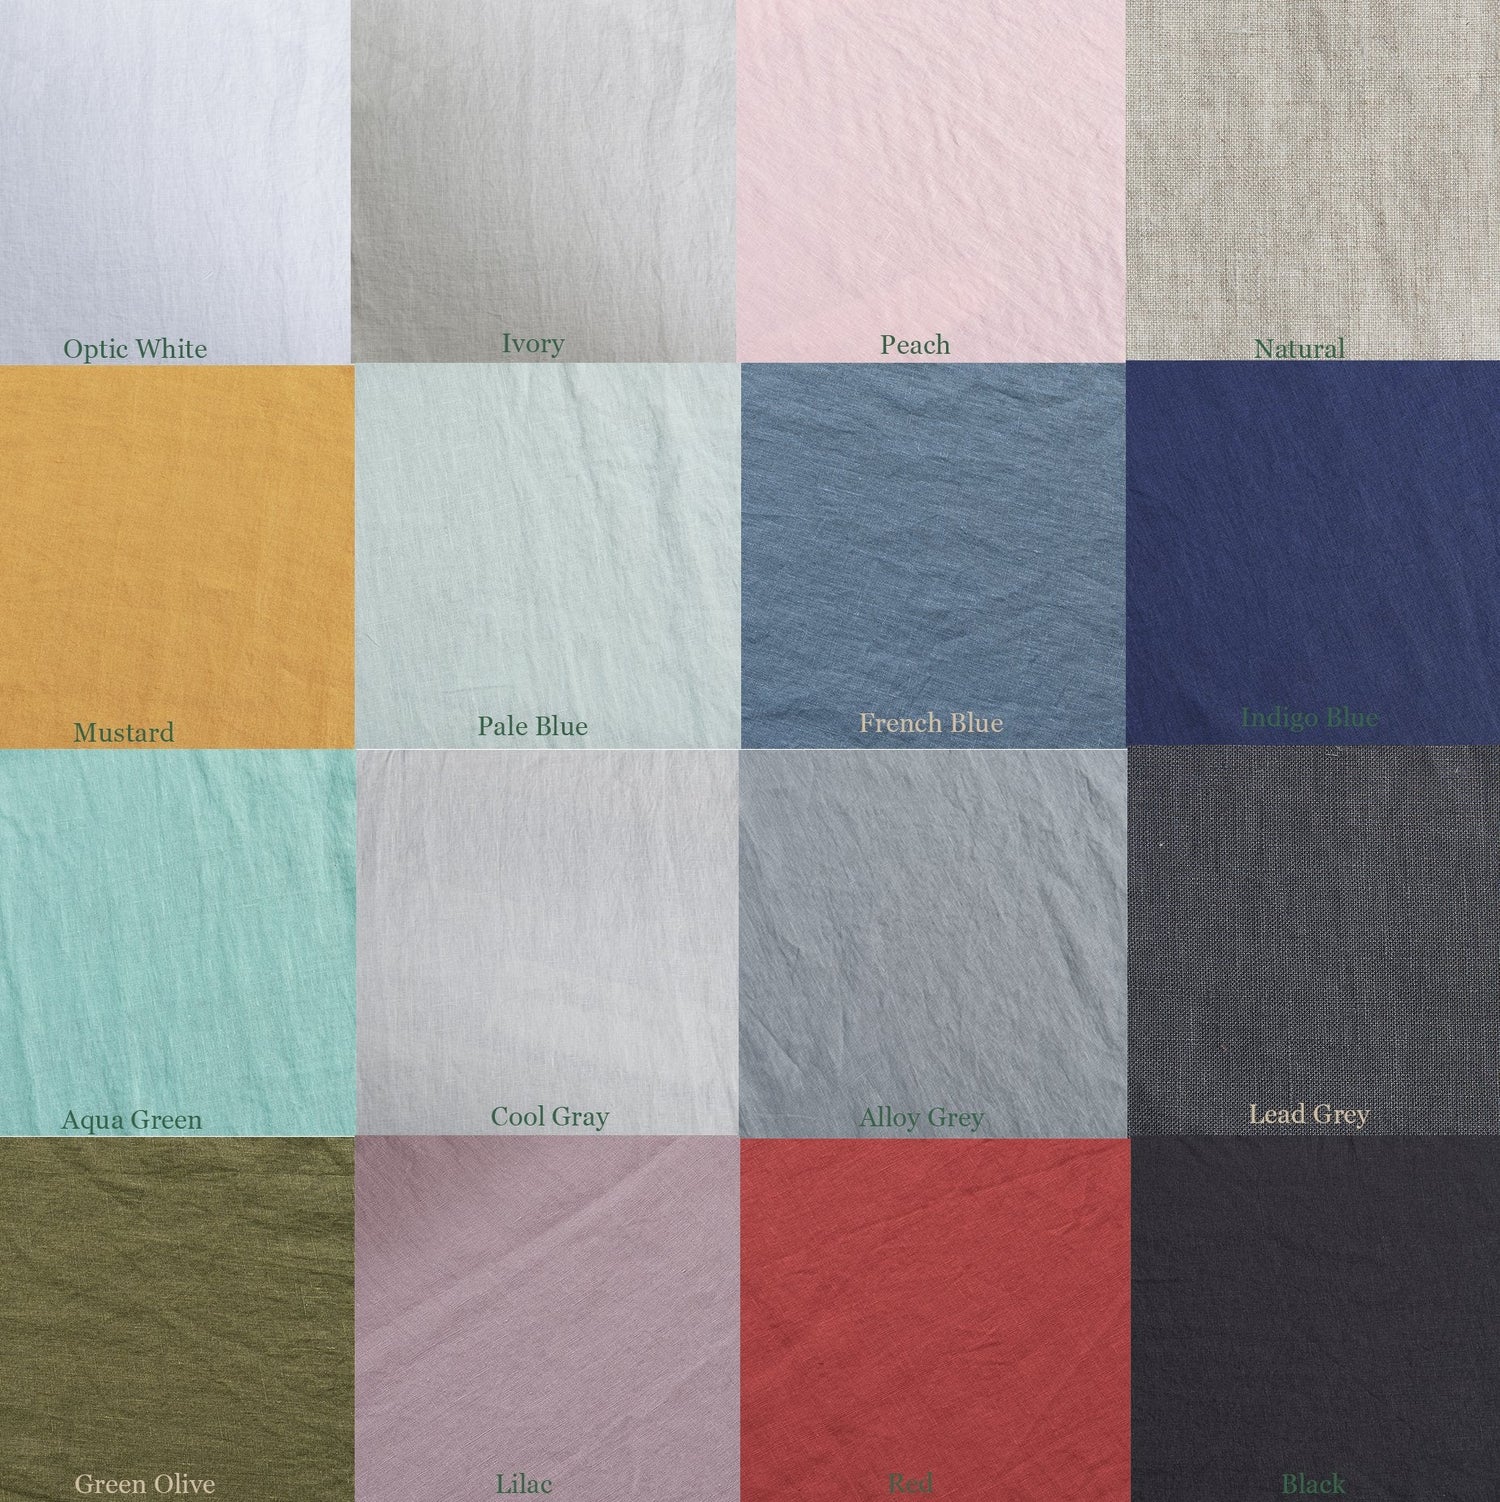 Linenforce Color Swatches for Linen Bedding, Curtains, and Table Linens